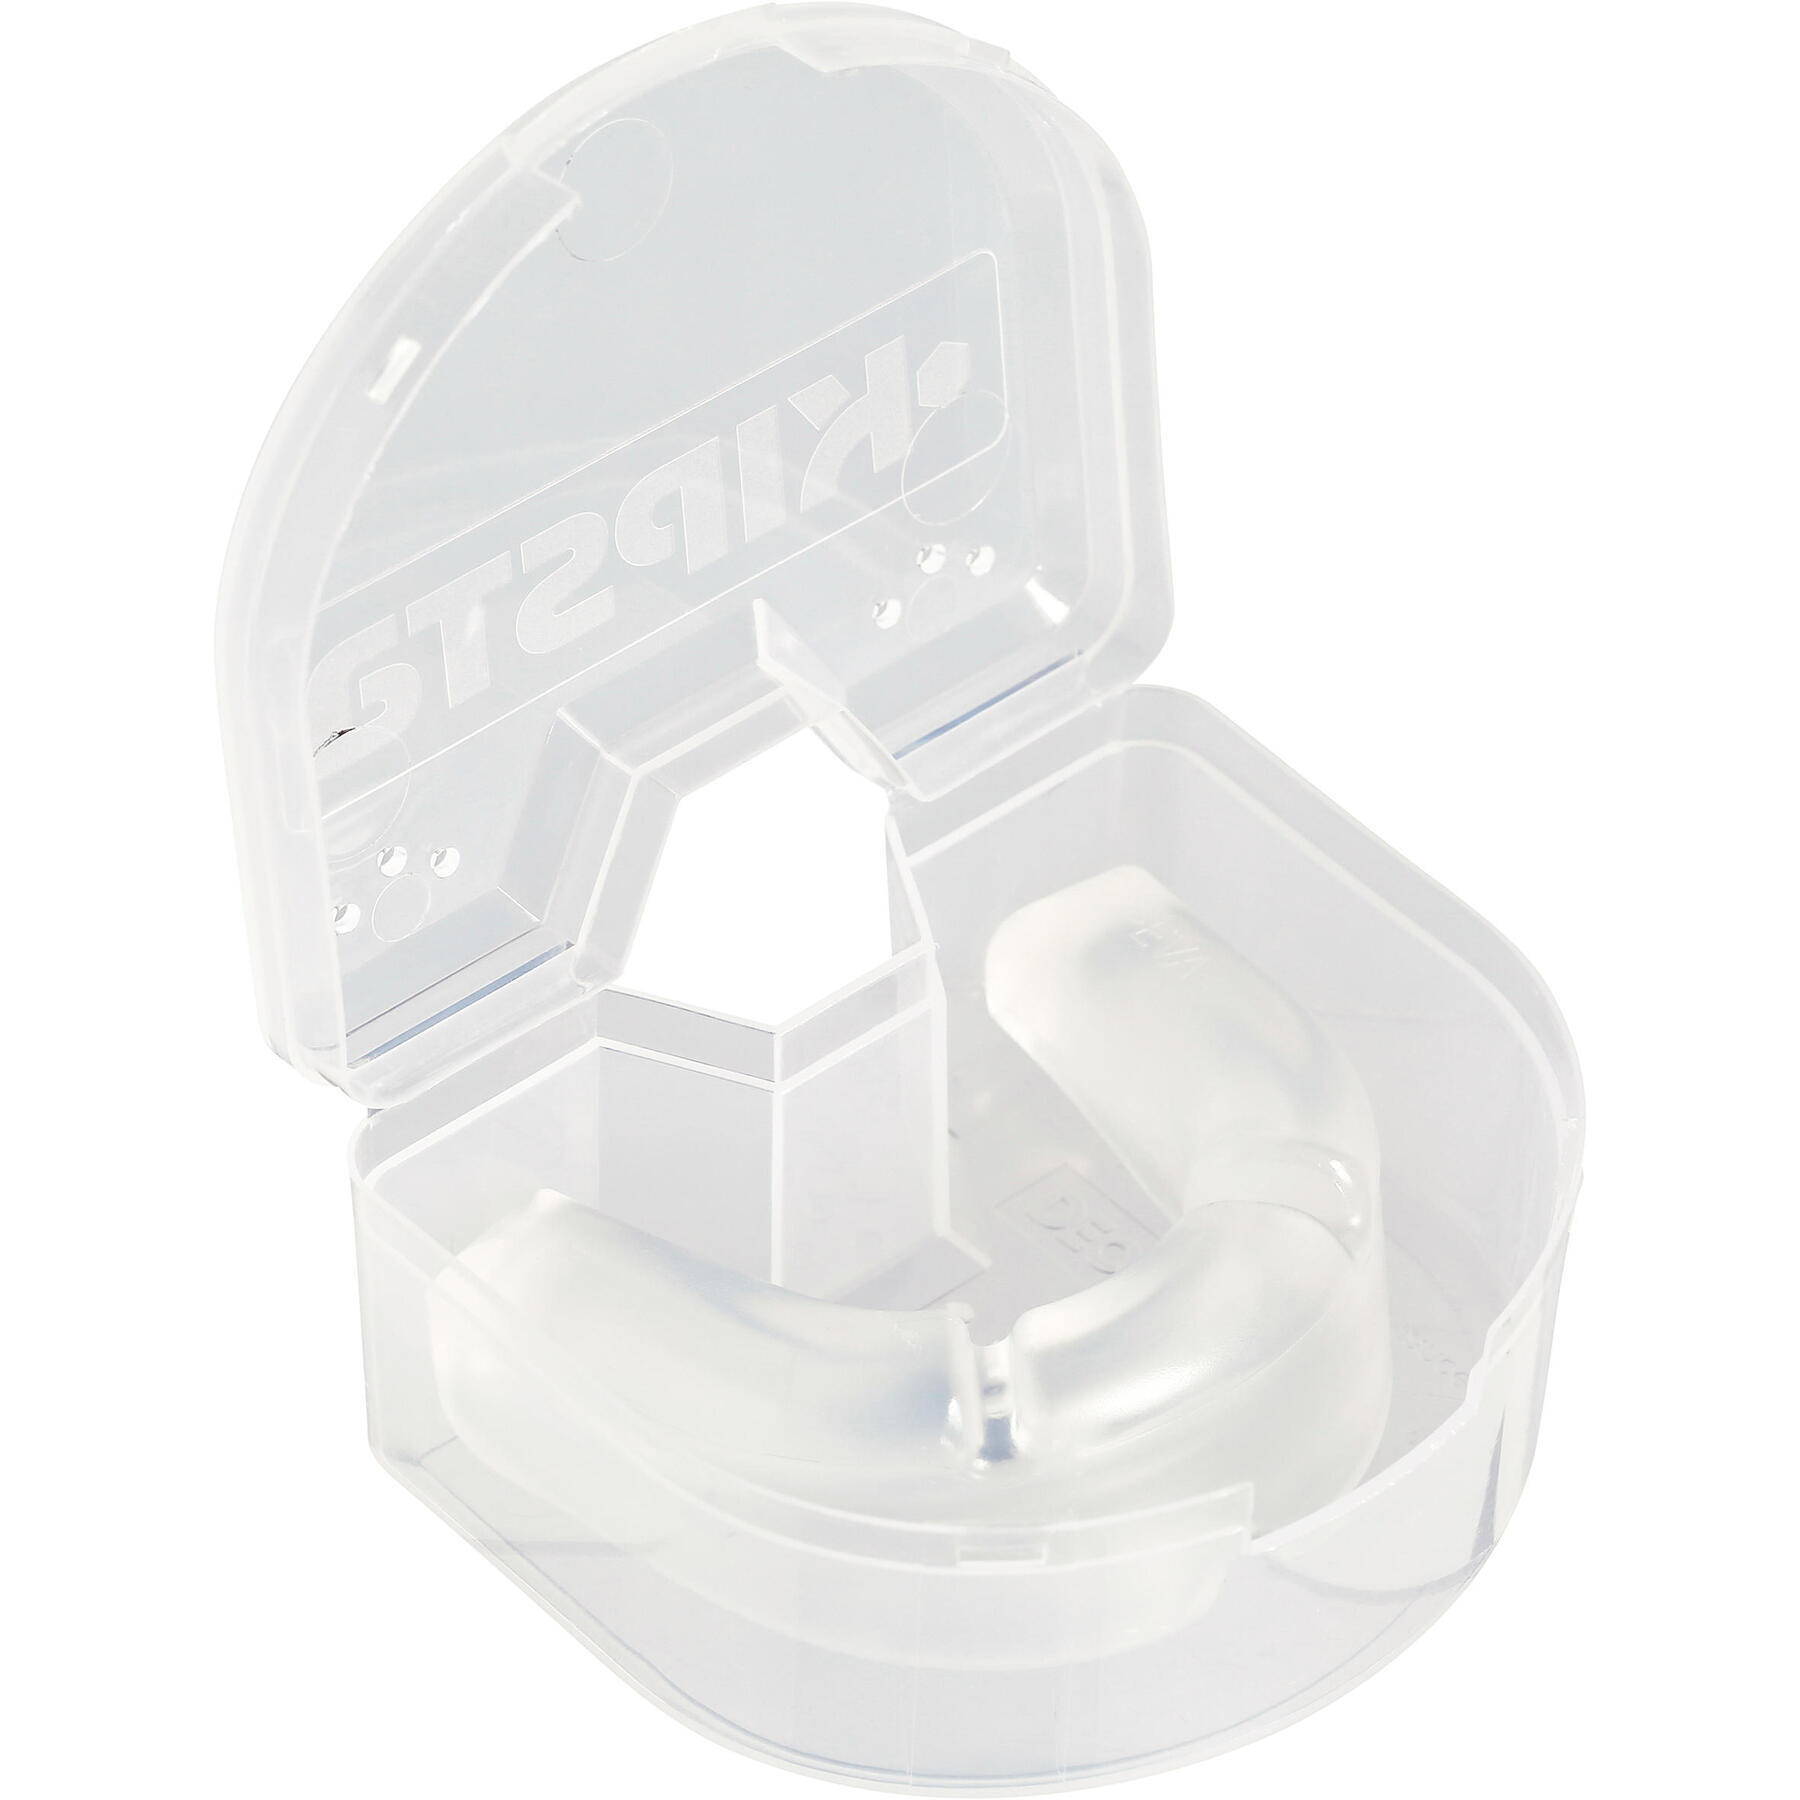 Refurbished Size M Transparent Rugby Mouthguard R100 - B Grade 7/7